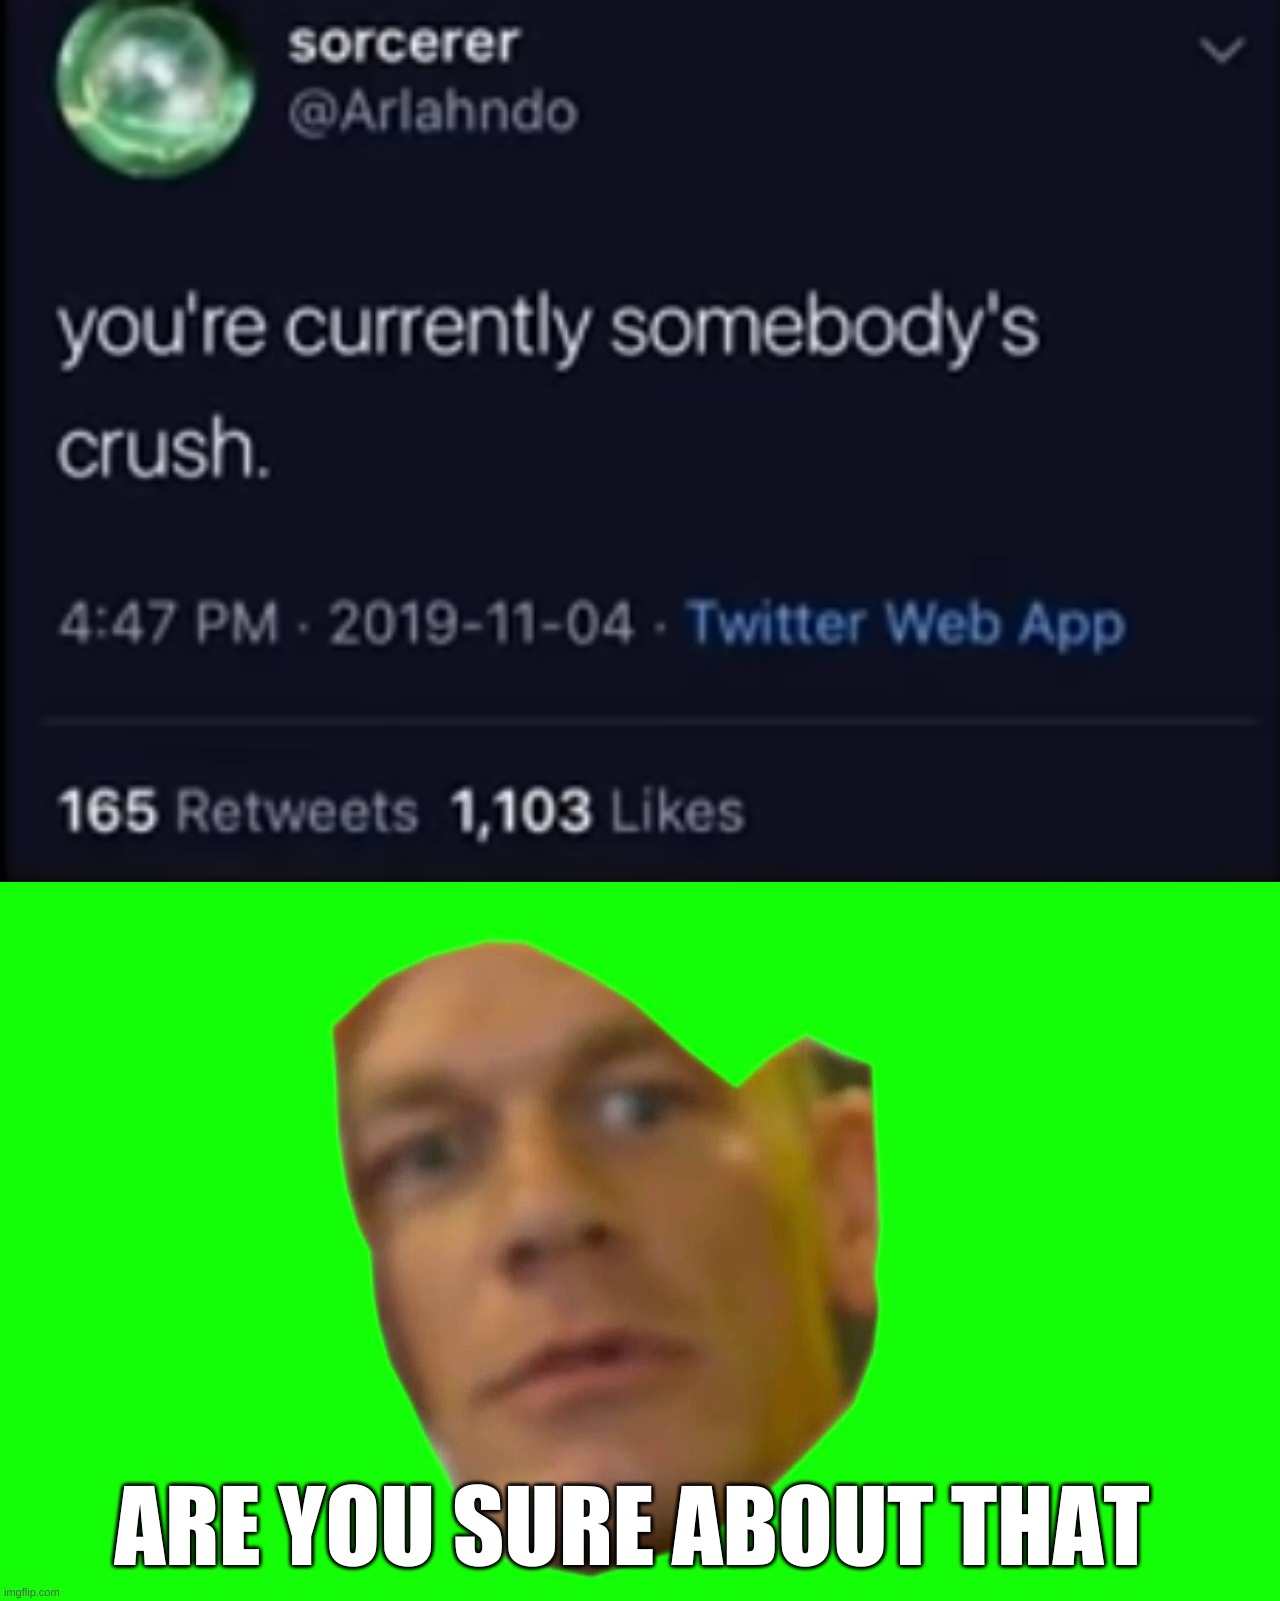 ARE YOU SURE ABOUT THAT | image tagged in are you sure about that cena | made w/ Imgflip meme maker